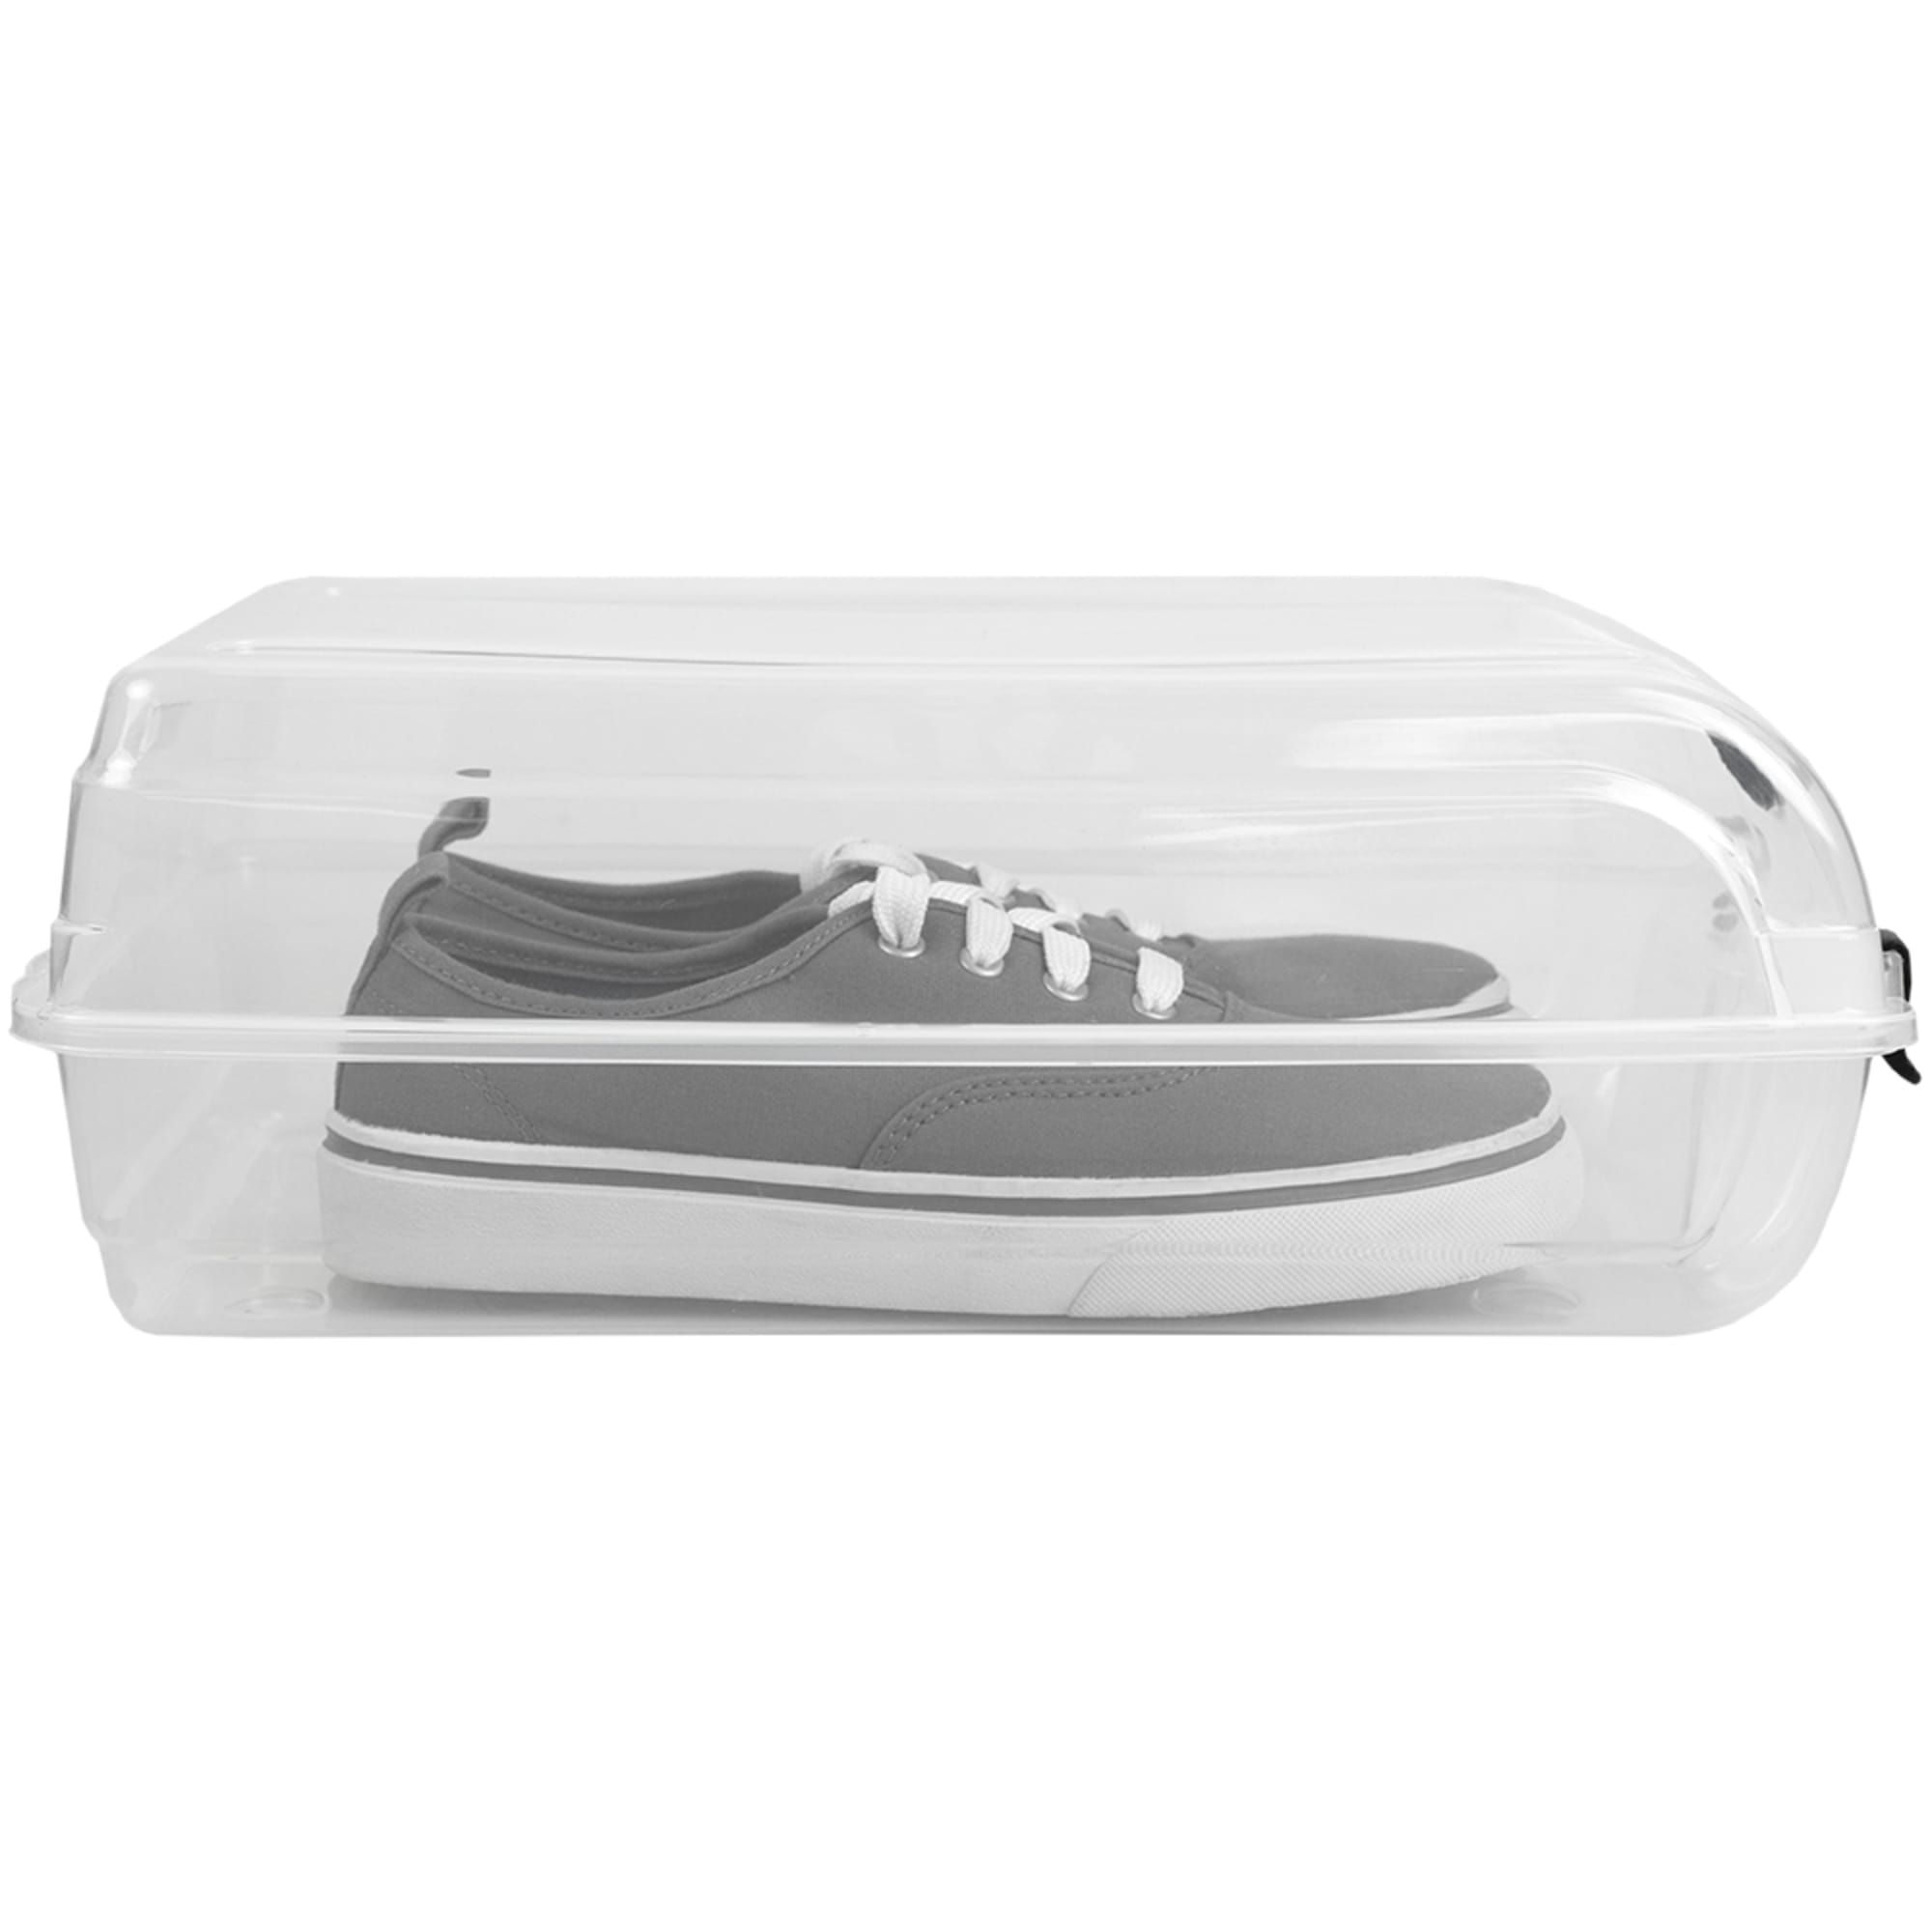 Home Basics Large Multi-Purpose Stackable Shoe Organizer with Locking Tabs and Hole Handle, Clear $4.00 EACH, CASE PACK OF 12